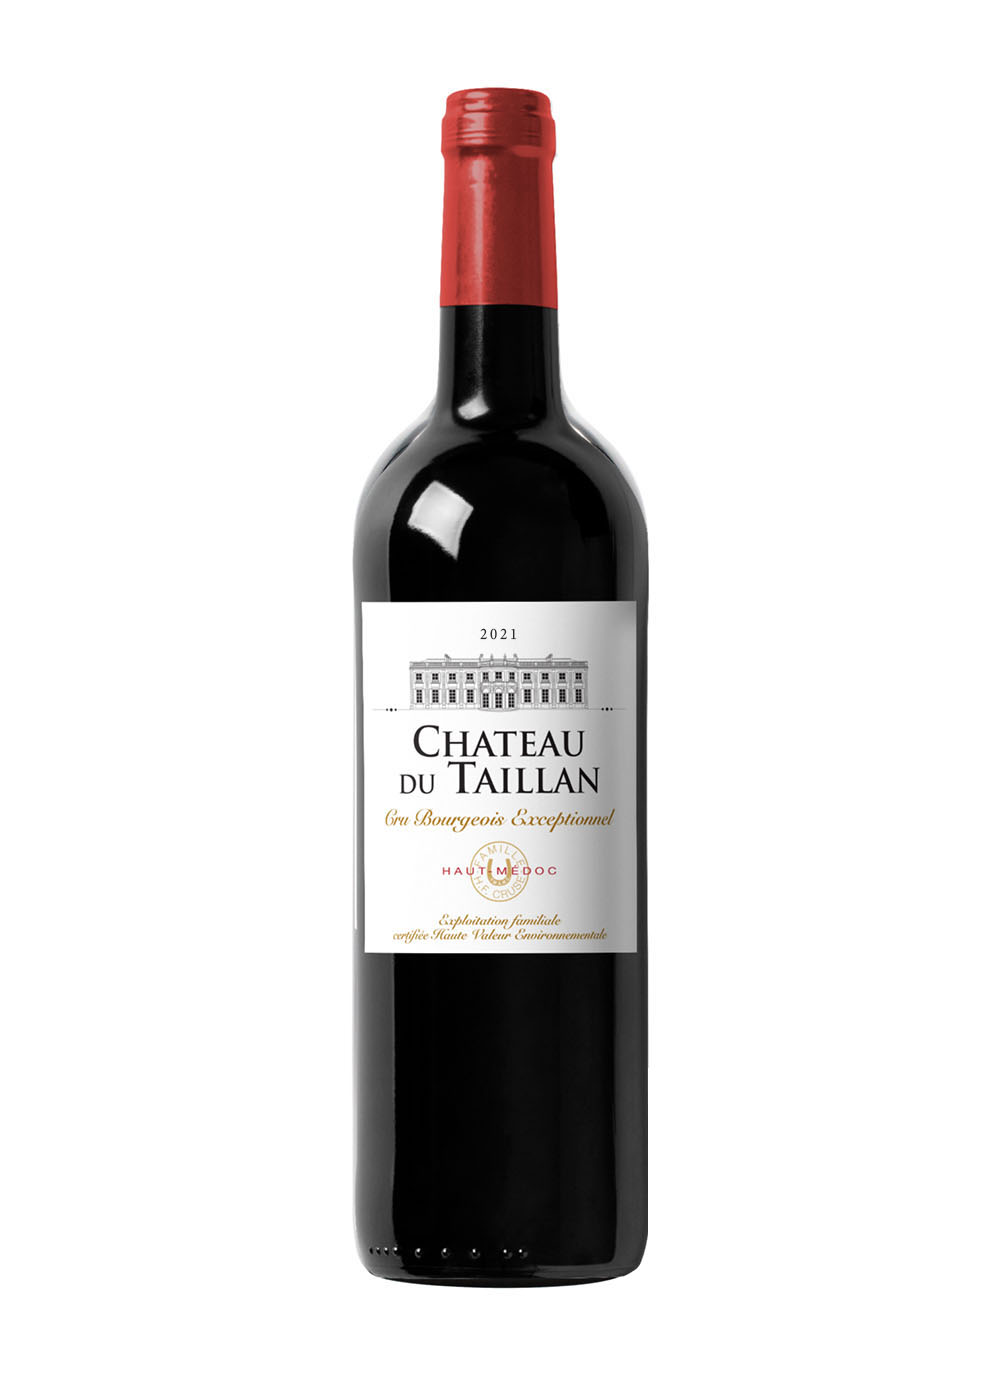 Taillan-2021-cru-bourgeois-exceptionnel